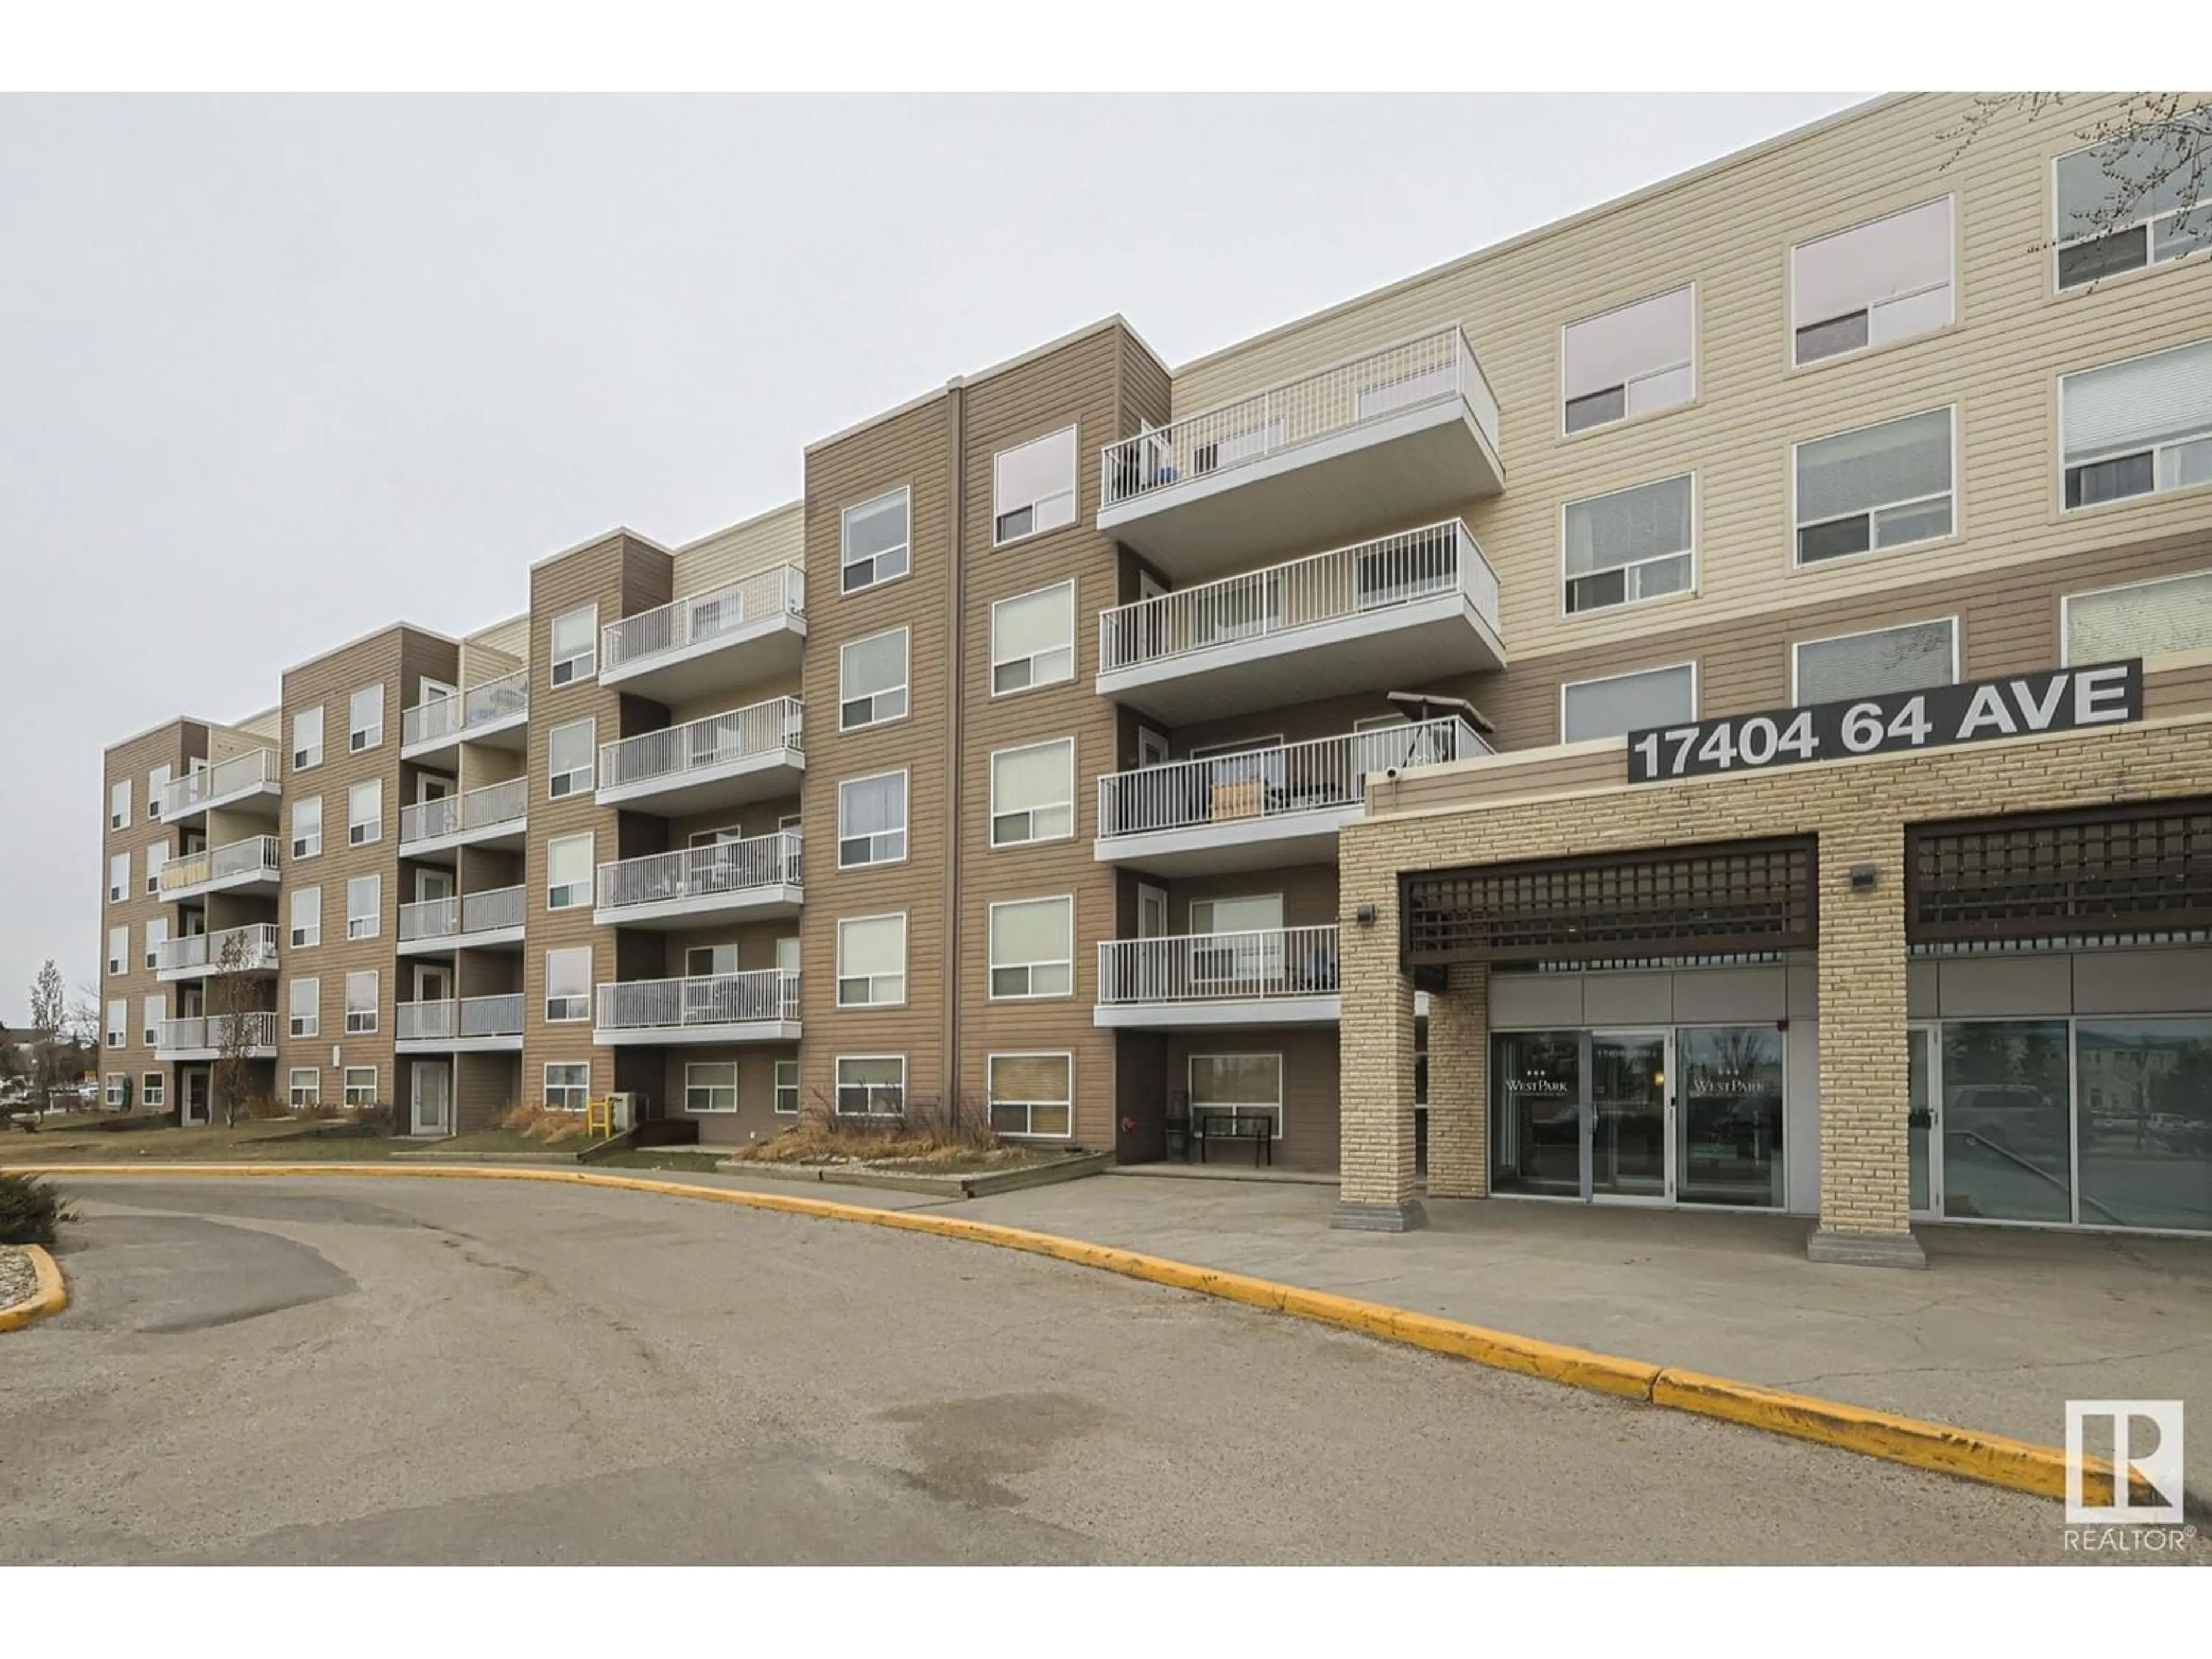 A pic from exterior of the house or condo for #105 17404 64 AV NW, Edmonton Alberta T5T6X4